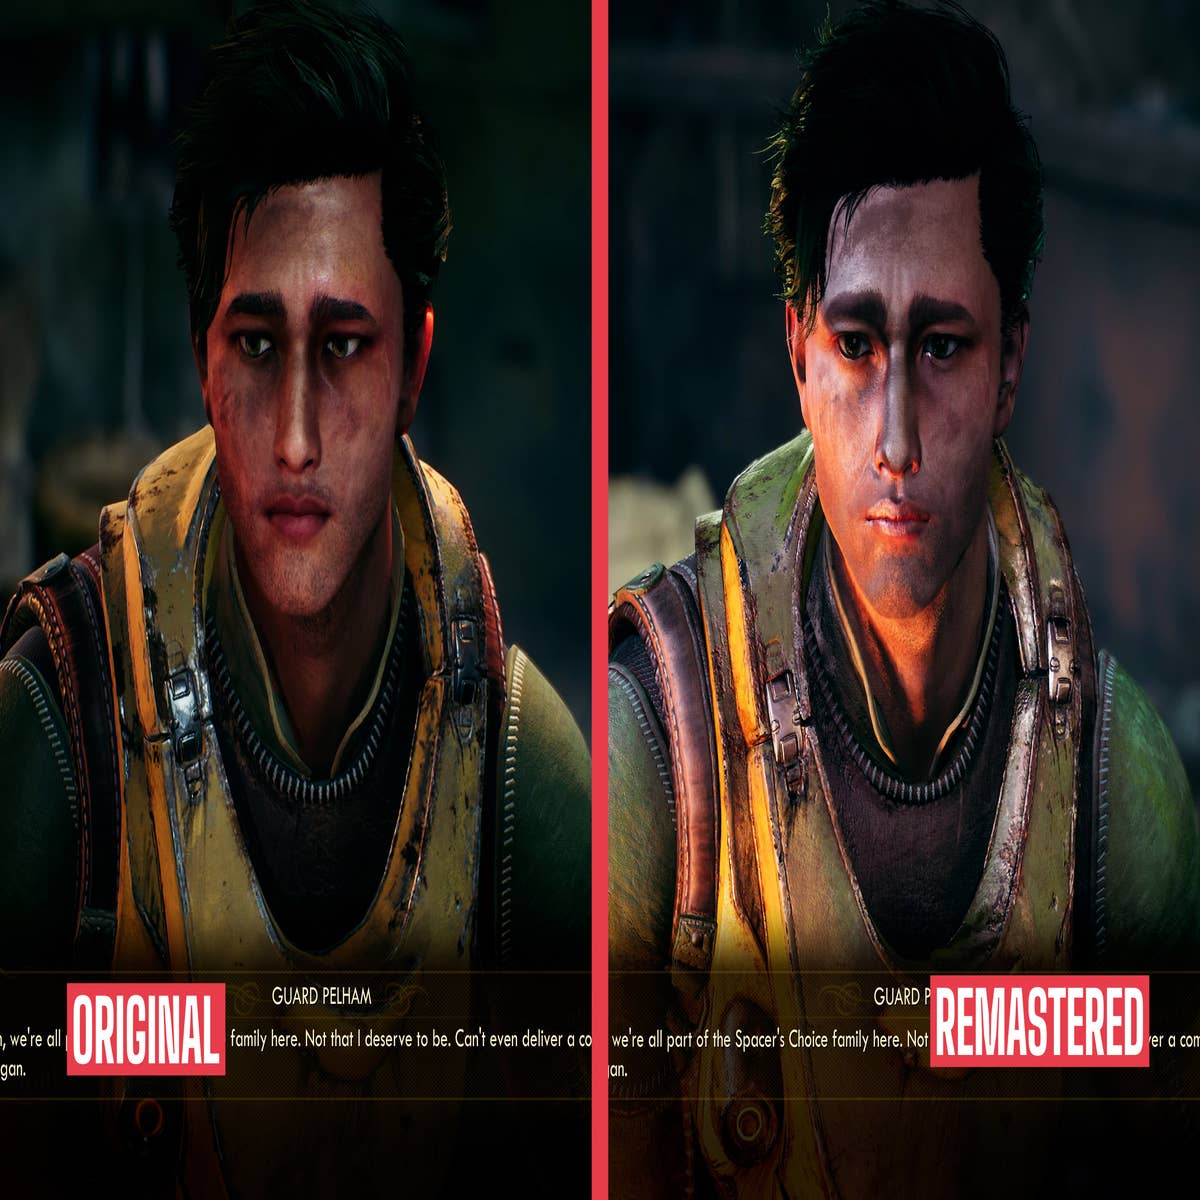 The Outer Worlds — Spacer's Choice Edition 